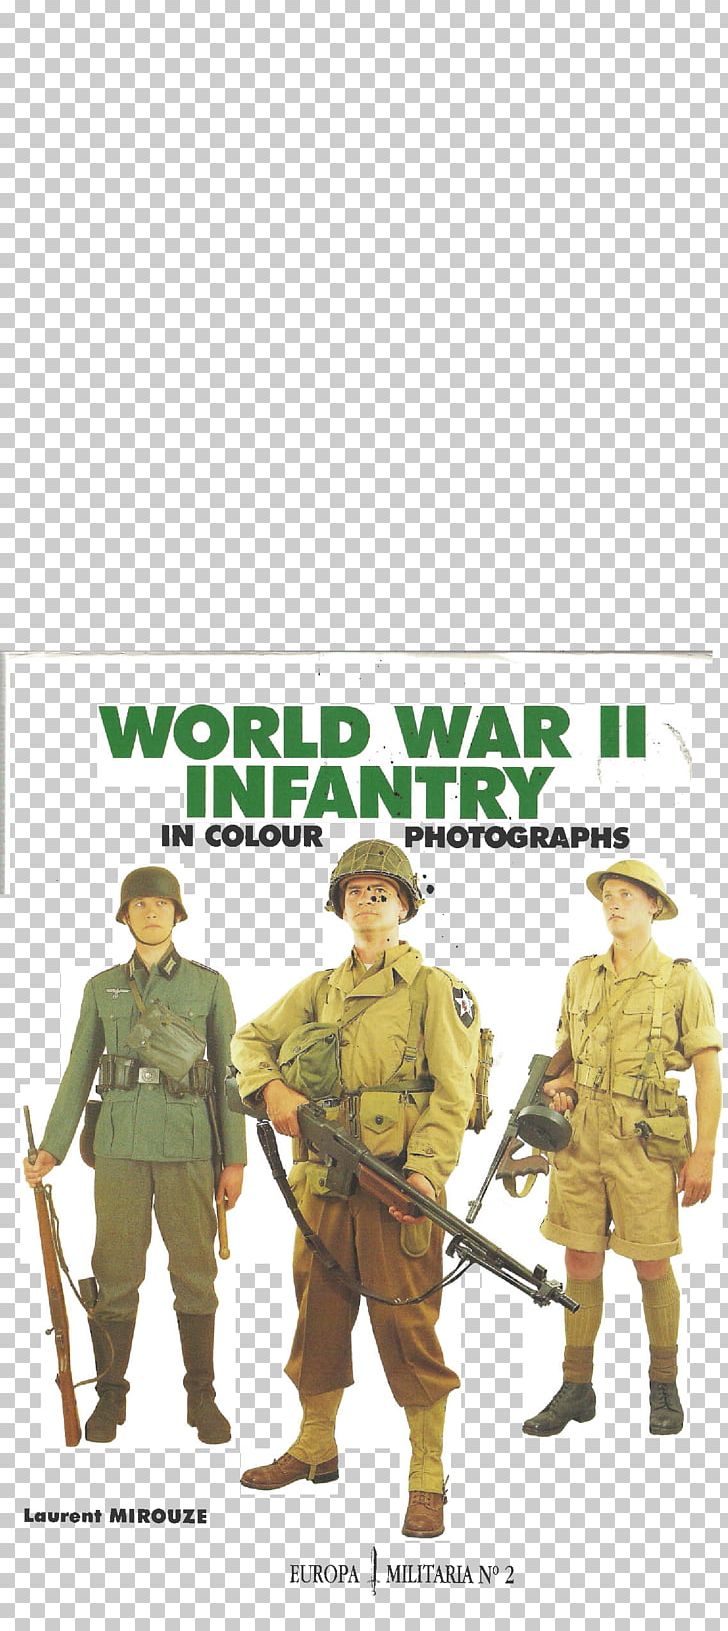 World War II Infantry In Colour Photographs Second World War Military Uniform Europe PNG, Clipart, Army, Army Men, Book, Colour Photographs, Europa Free PNG Download